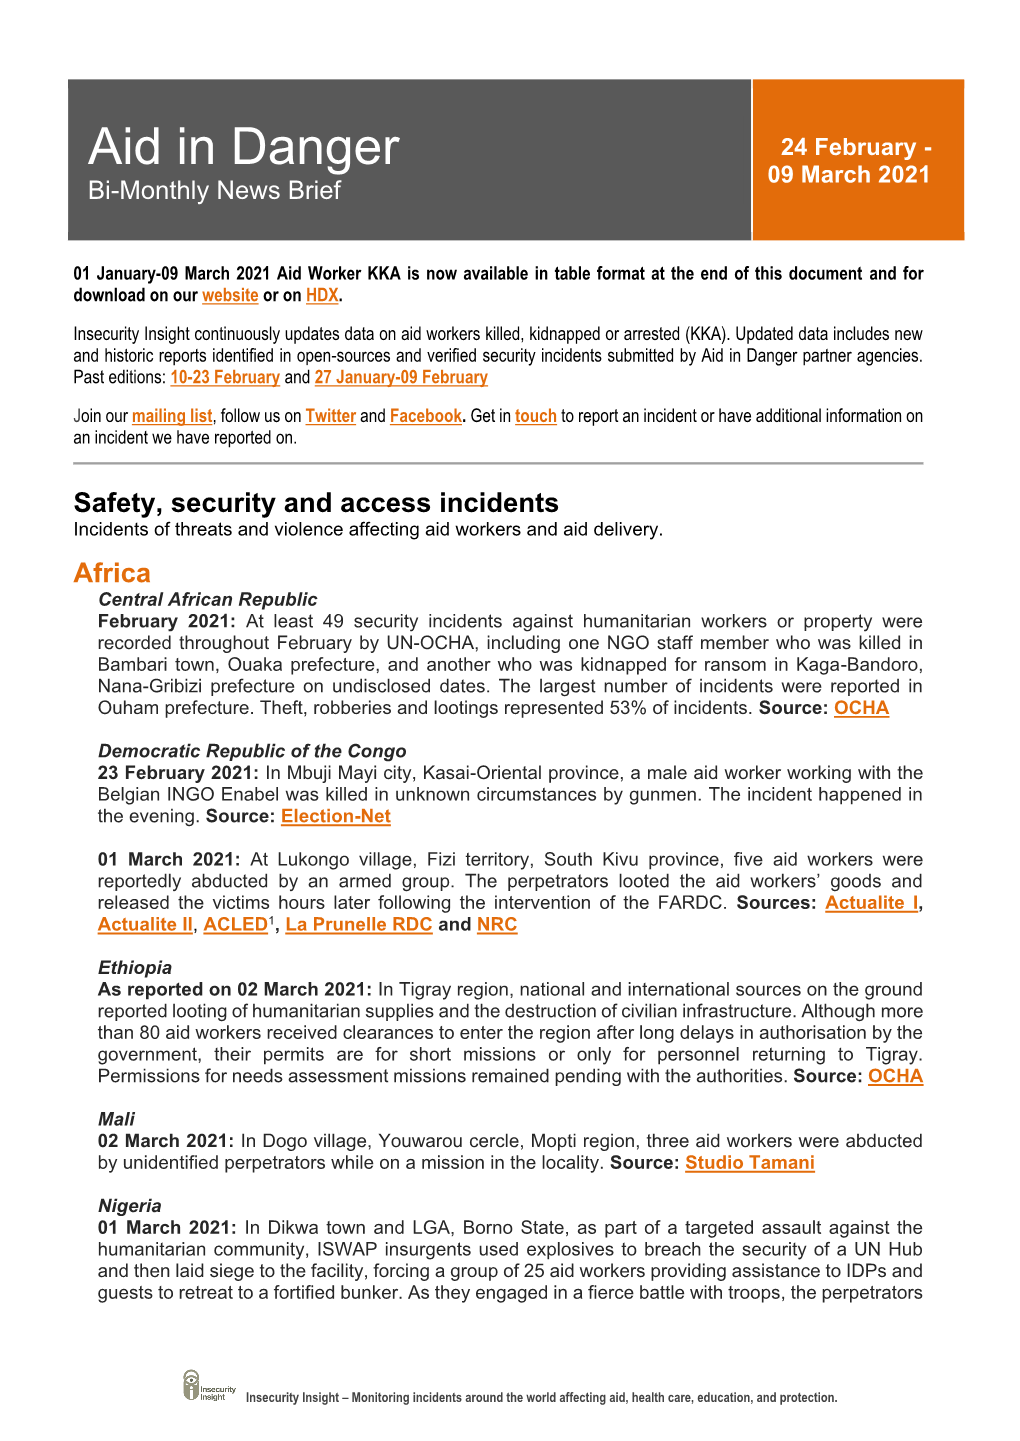 The Aid in Danger Bi-Monthly News Brief